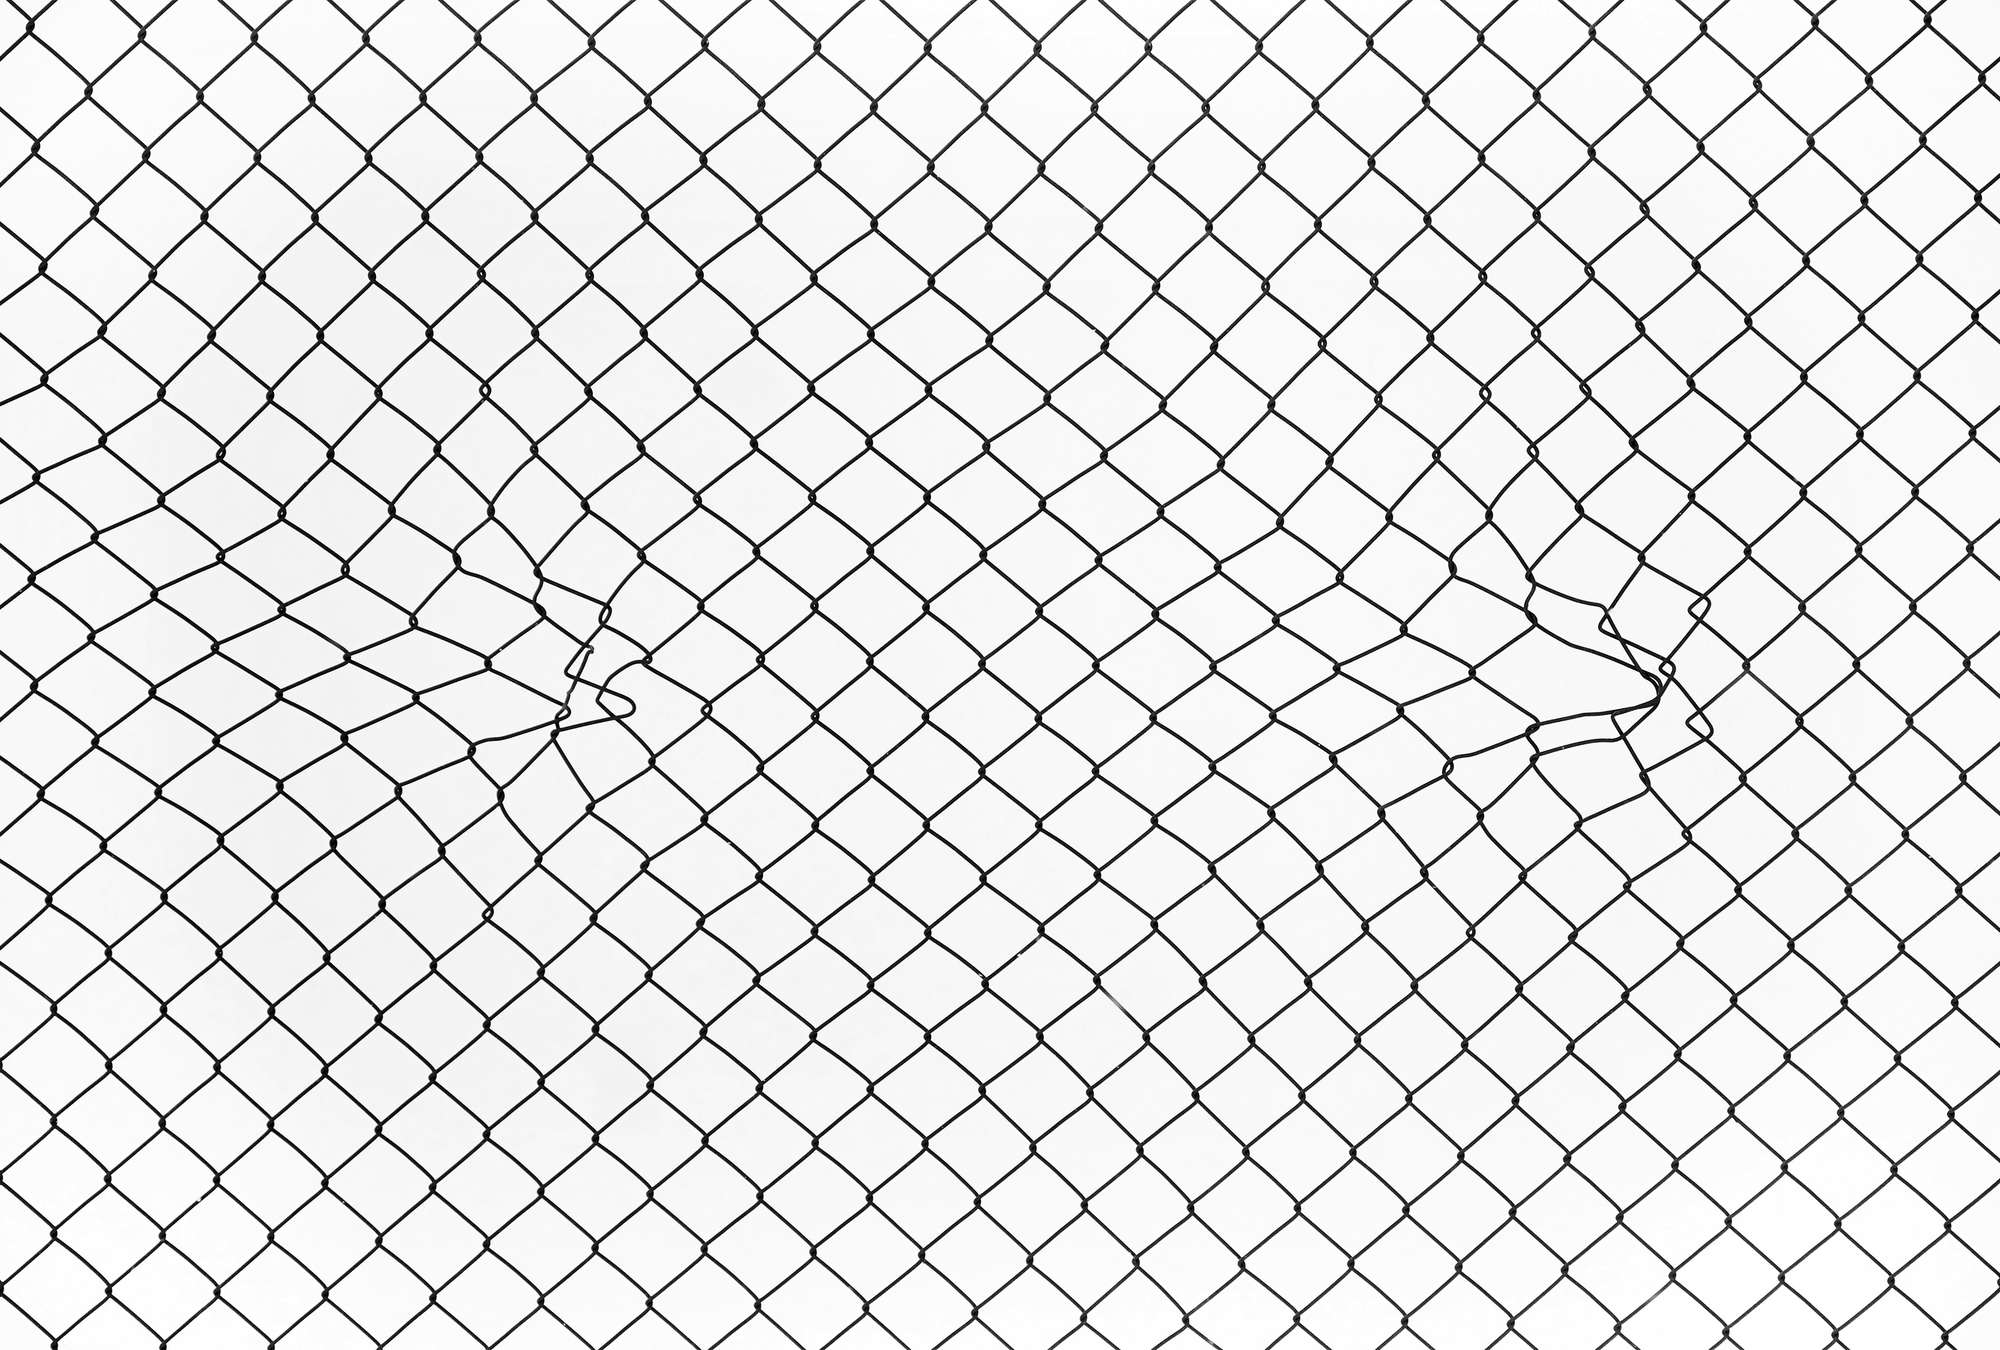             Design mural grid black and white graphic
        